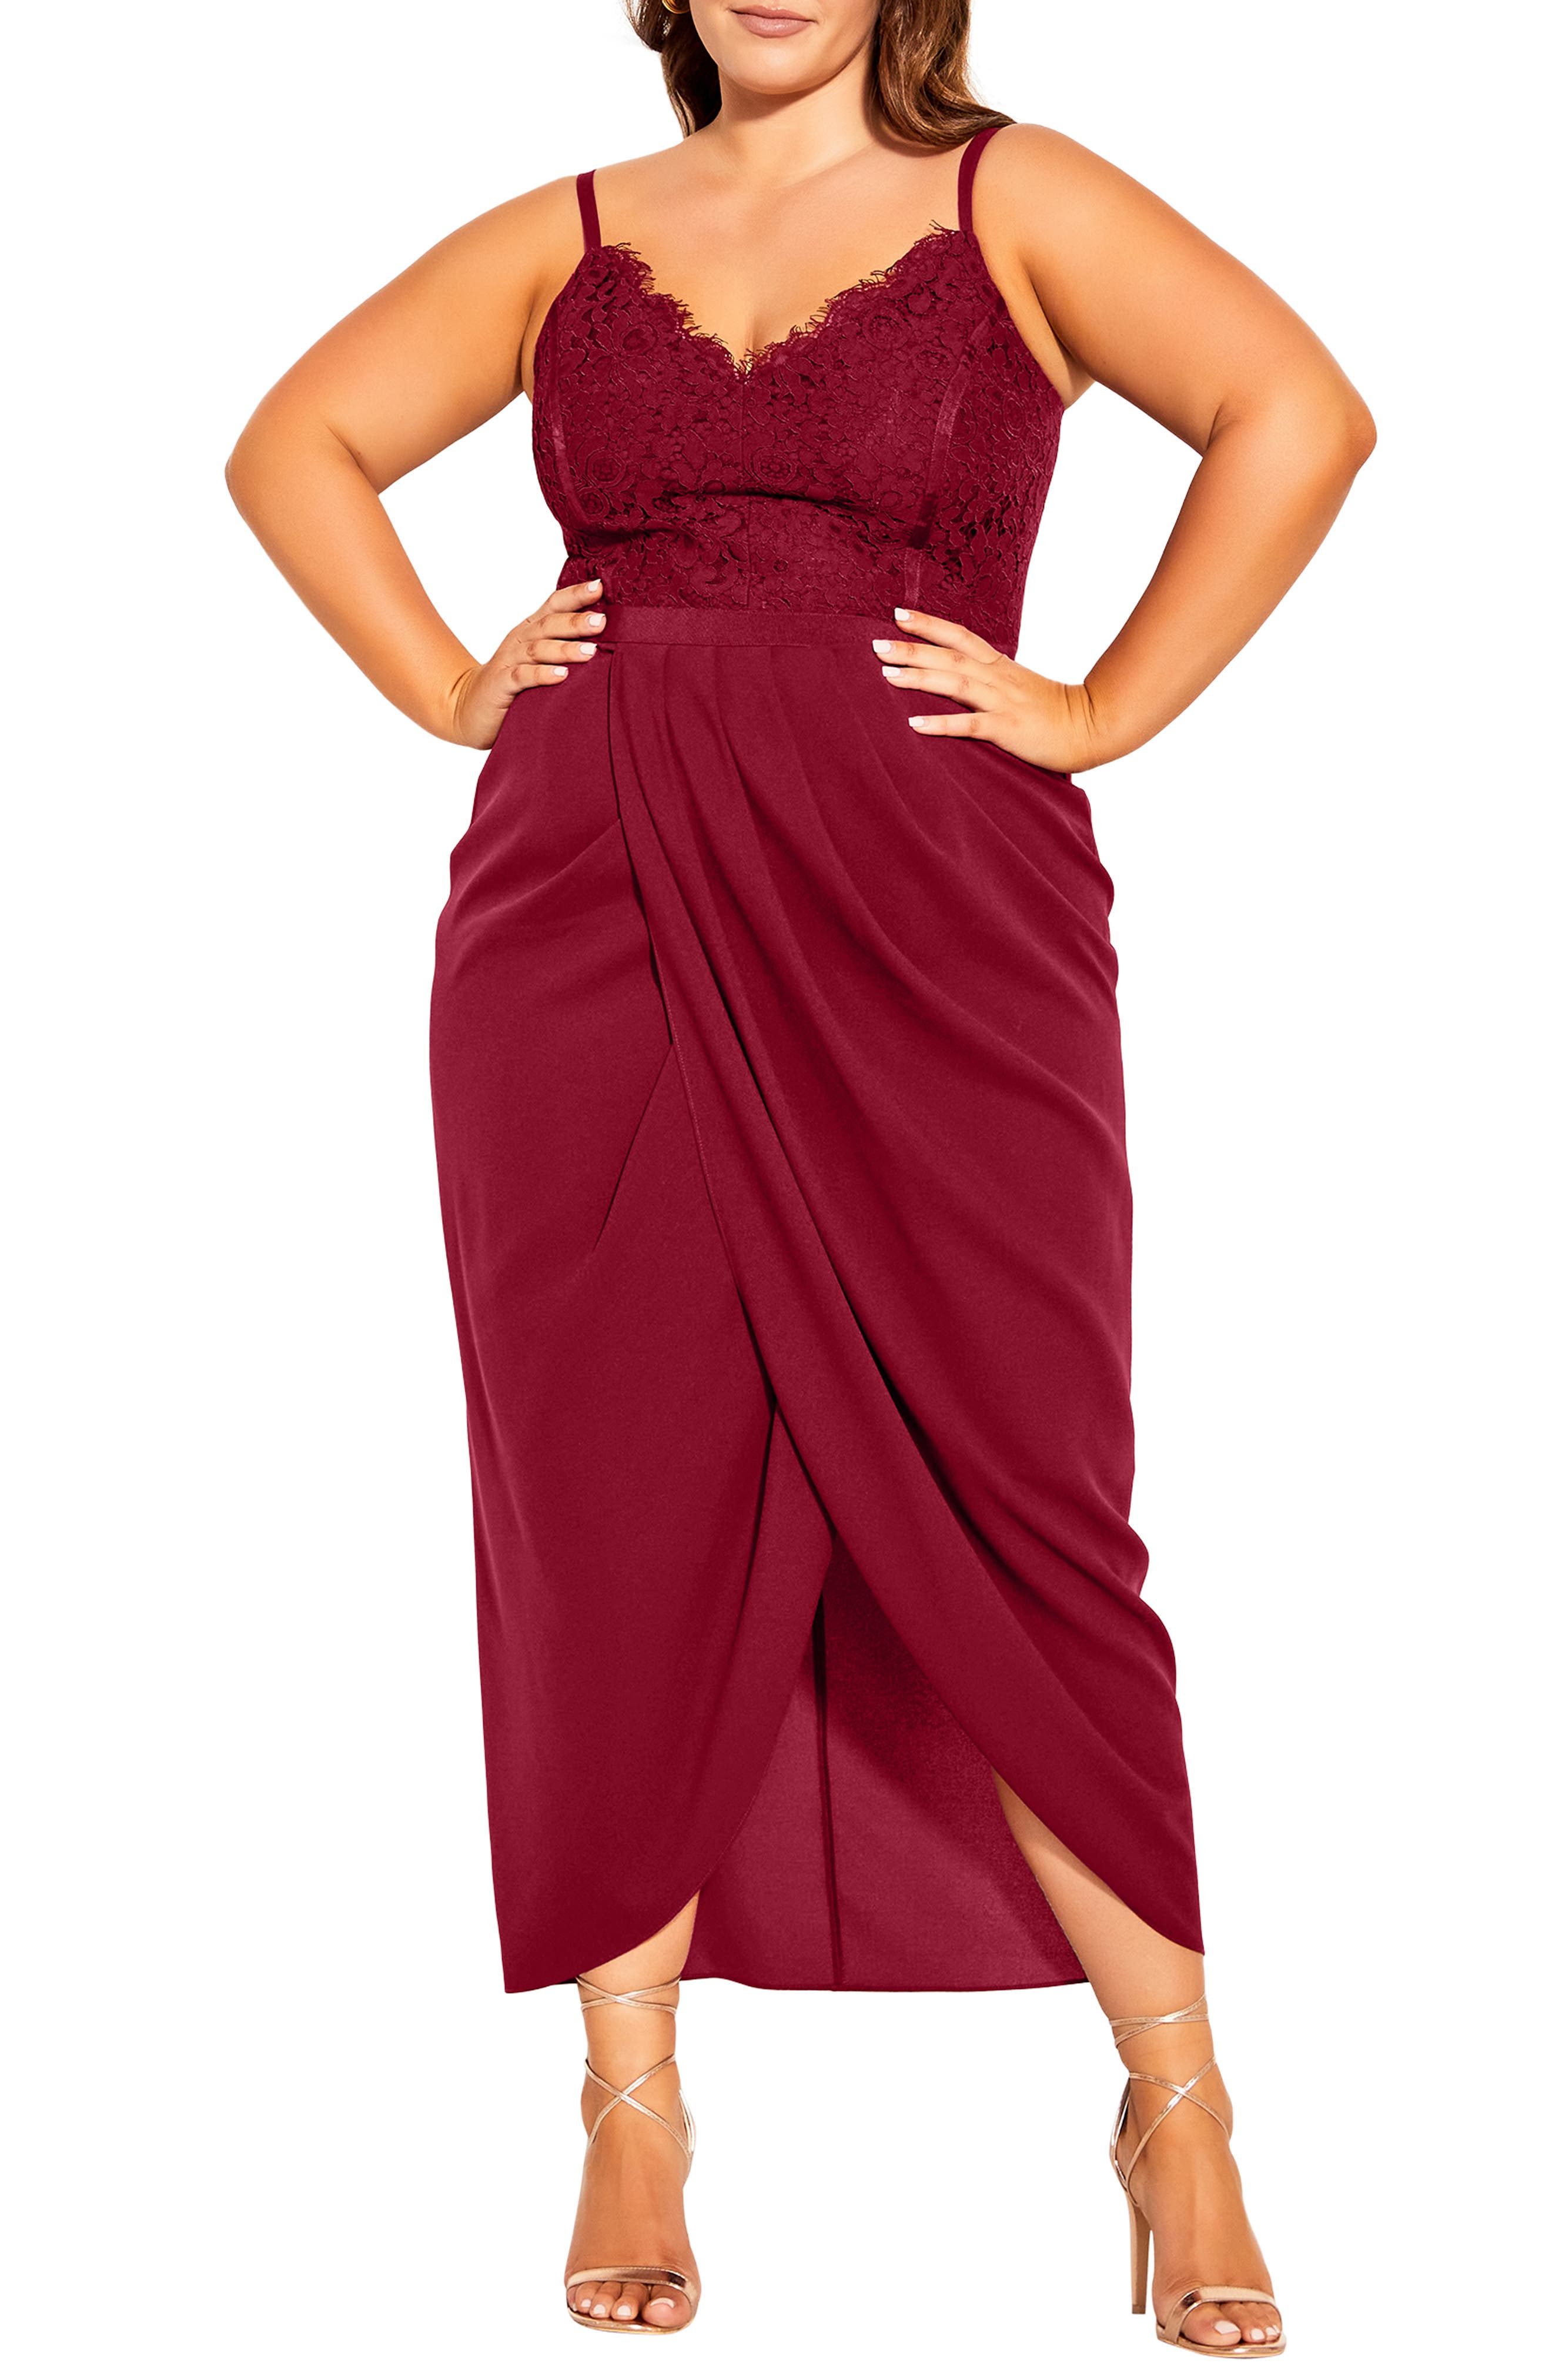 City Chic Plus Size Clothing For Women ...